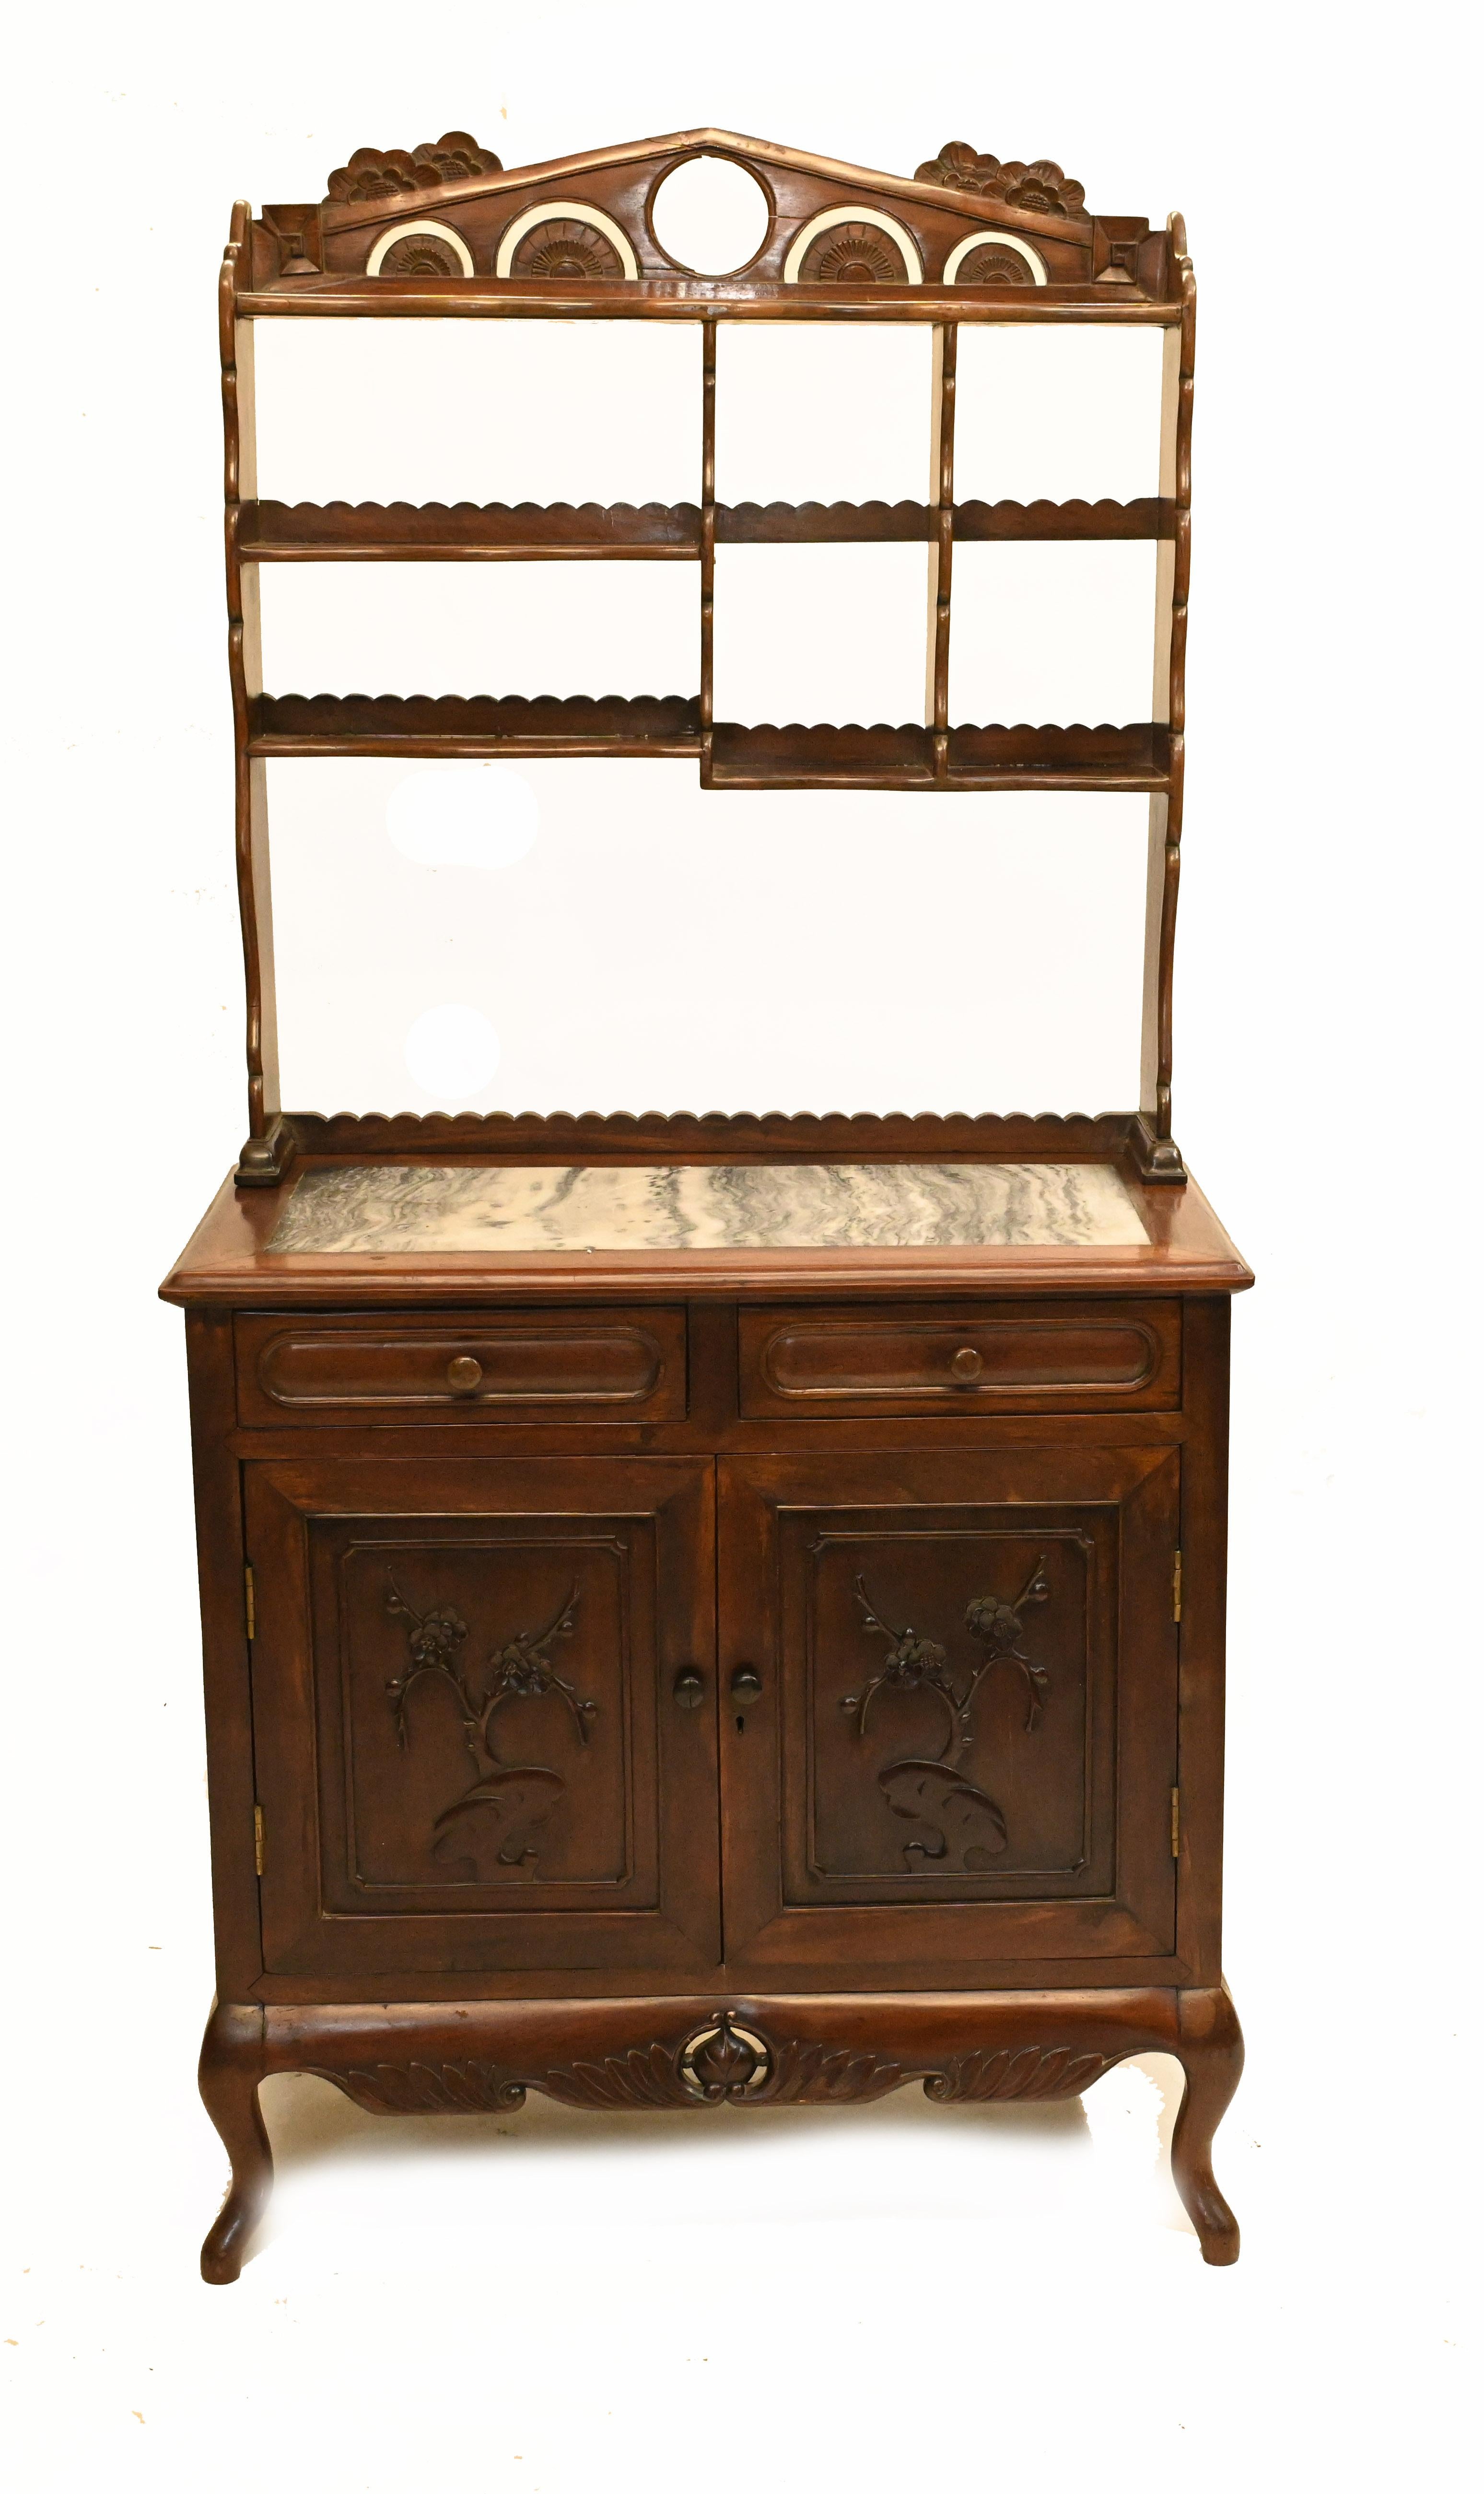 Stunning antique Chinese dresser in hardwood
Great for the kitchen with the marble top and shelving behind for storage
We date this to circa 1850
Nice Chinese trees in carved relief work on the two doors
Offered in great shape ready for home use